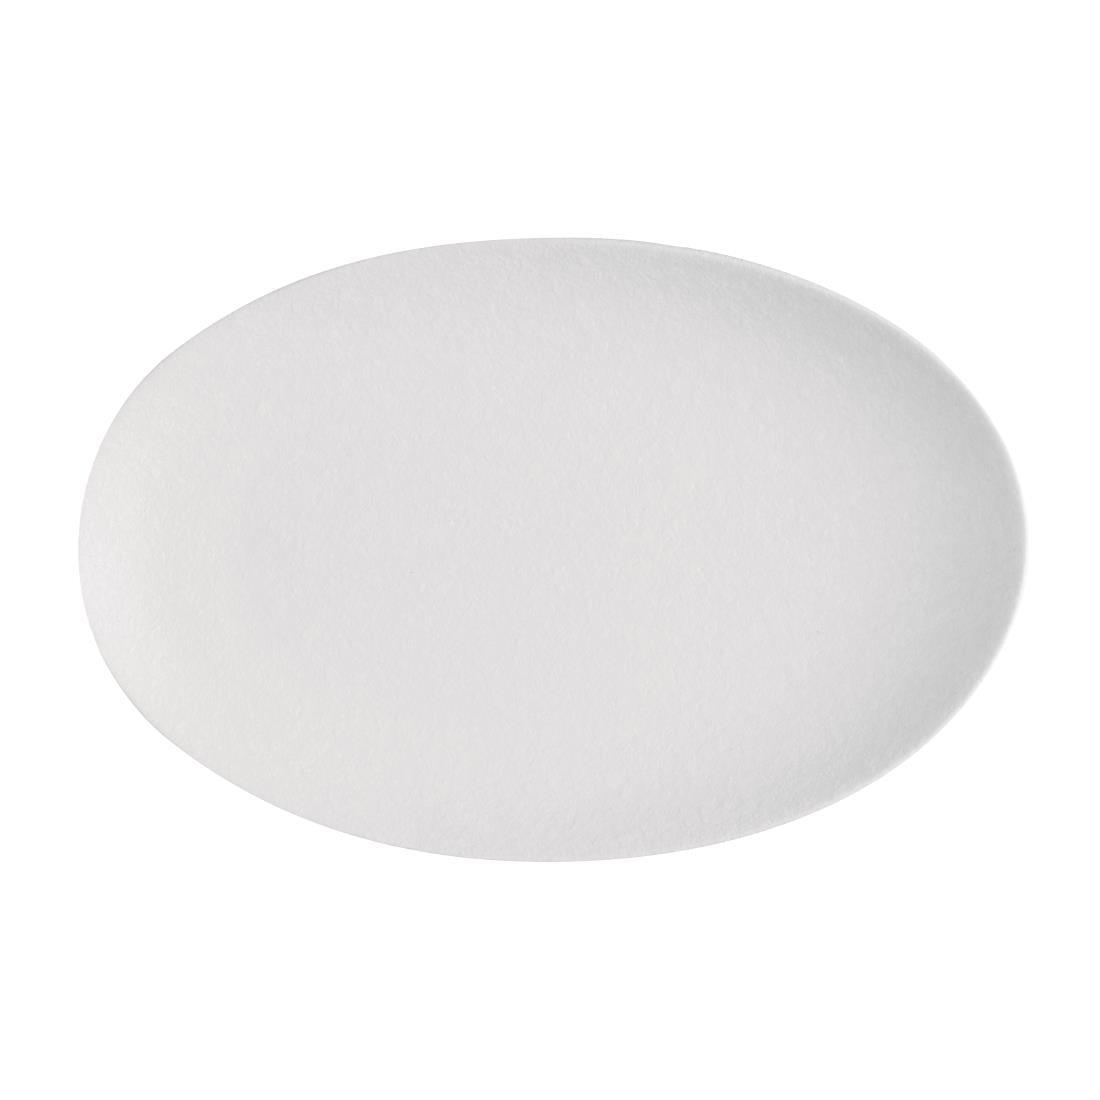 FD015 Olympia Salina Oval Plates 250mm (Pack of 4) JD Catering Equipment Solutions Ltd